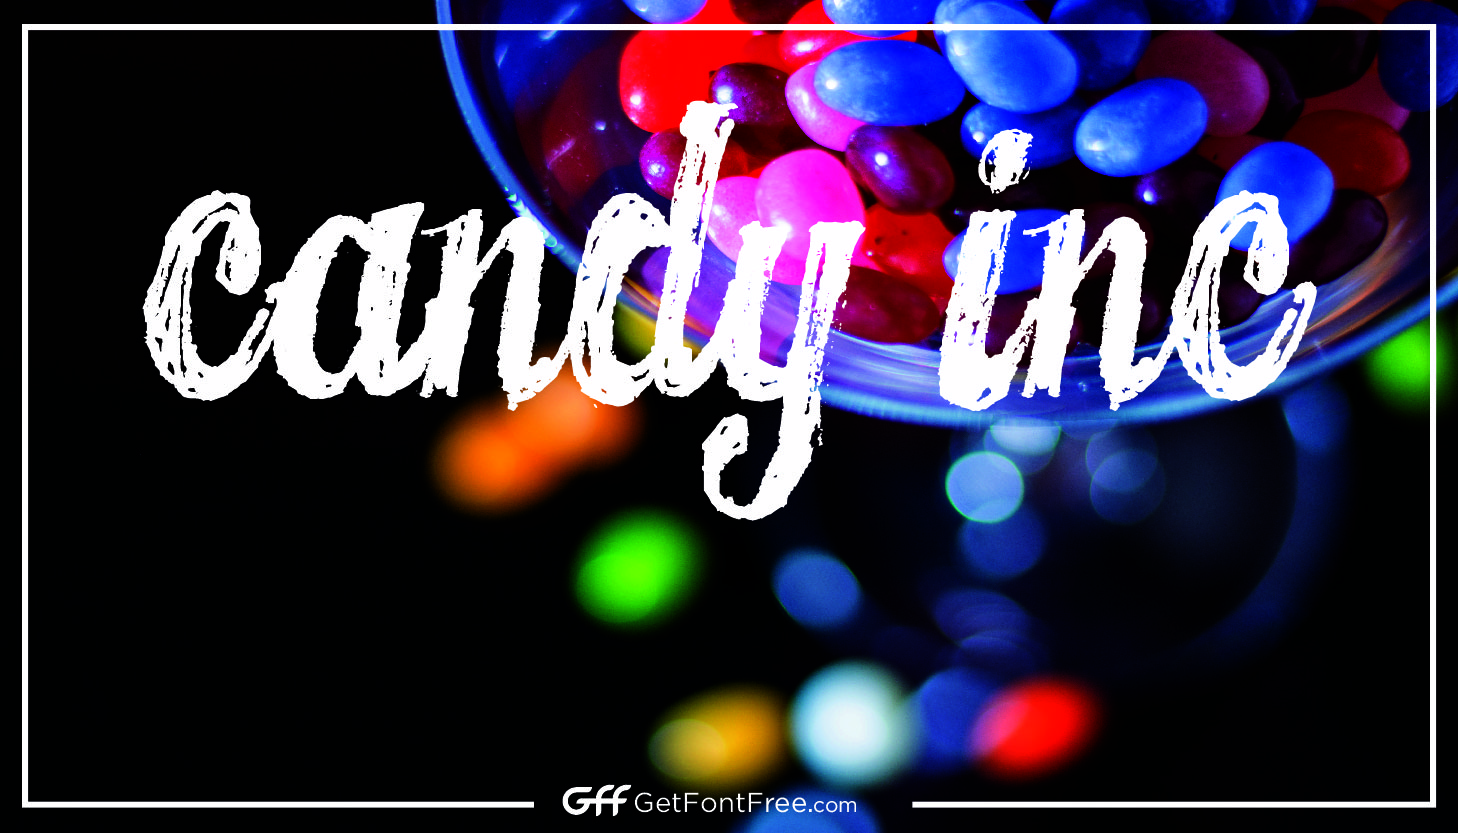 Candy Inc Font is a playful and eye-catching typeface that was designed to bring a touch of fun and creativity to any design project. With its unique and quirky character design, the Candy Inc font was inspired by the candy-colored packaging and branding of popular sweets and confectionery. The font was created with a bold and playful aesthetic in mind, making it a perfect choice for projects that require a sense of lightheartedness and whimsy.